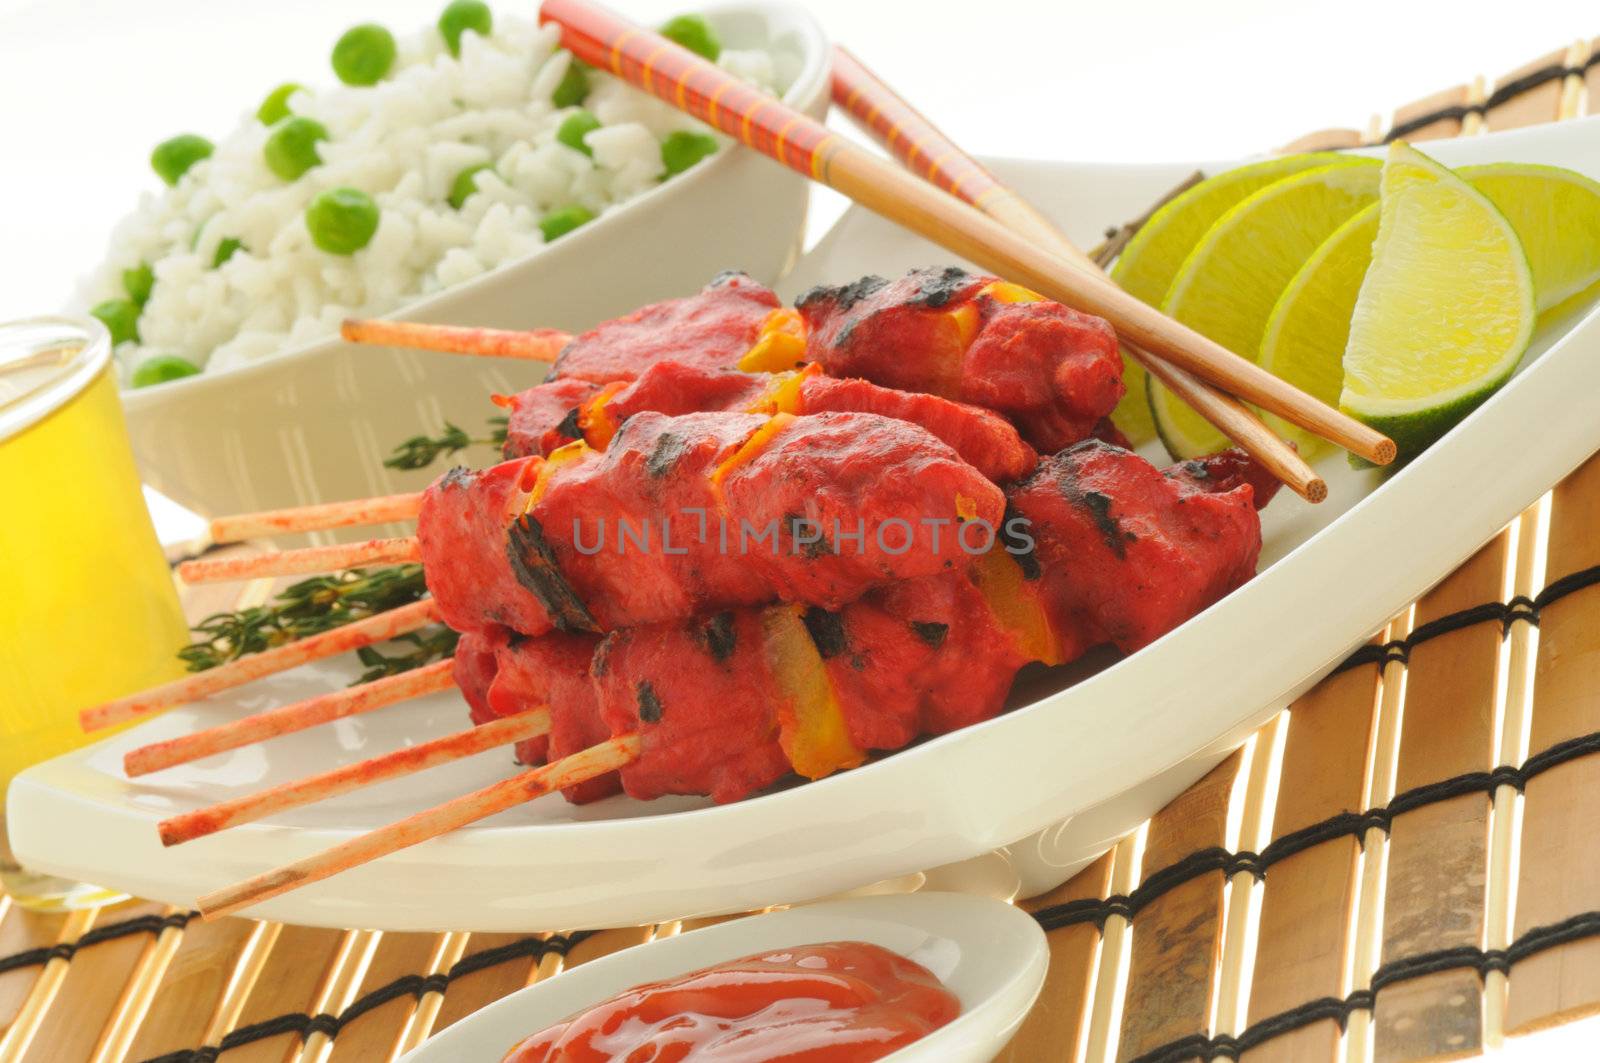 Delicious grilled chicken skewers served with rice.